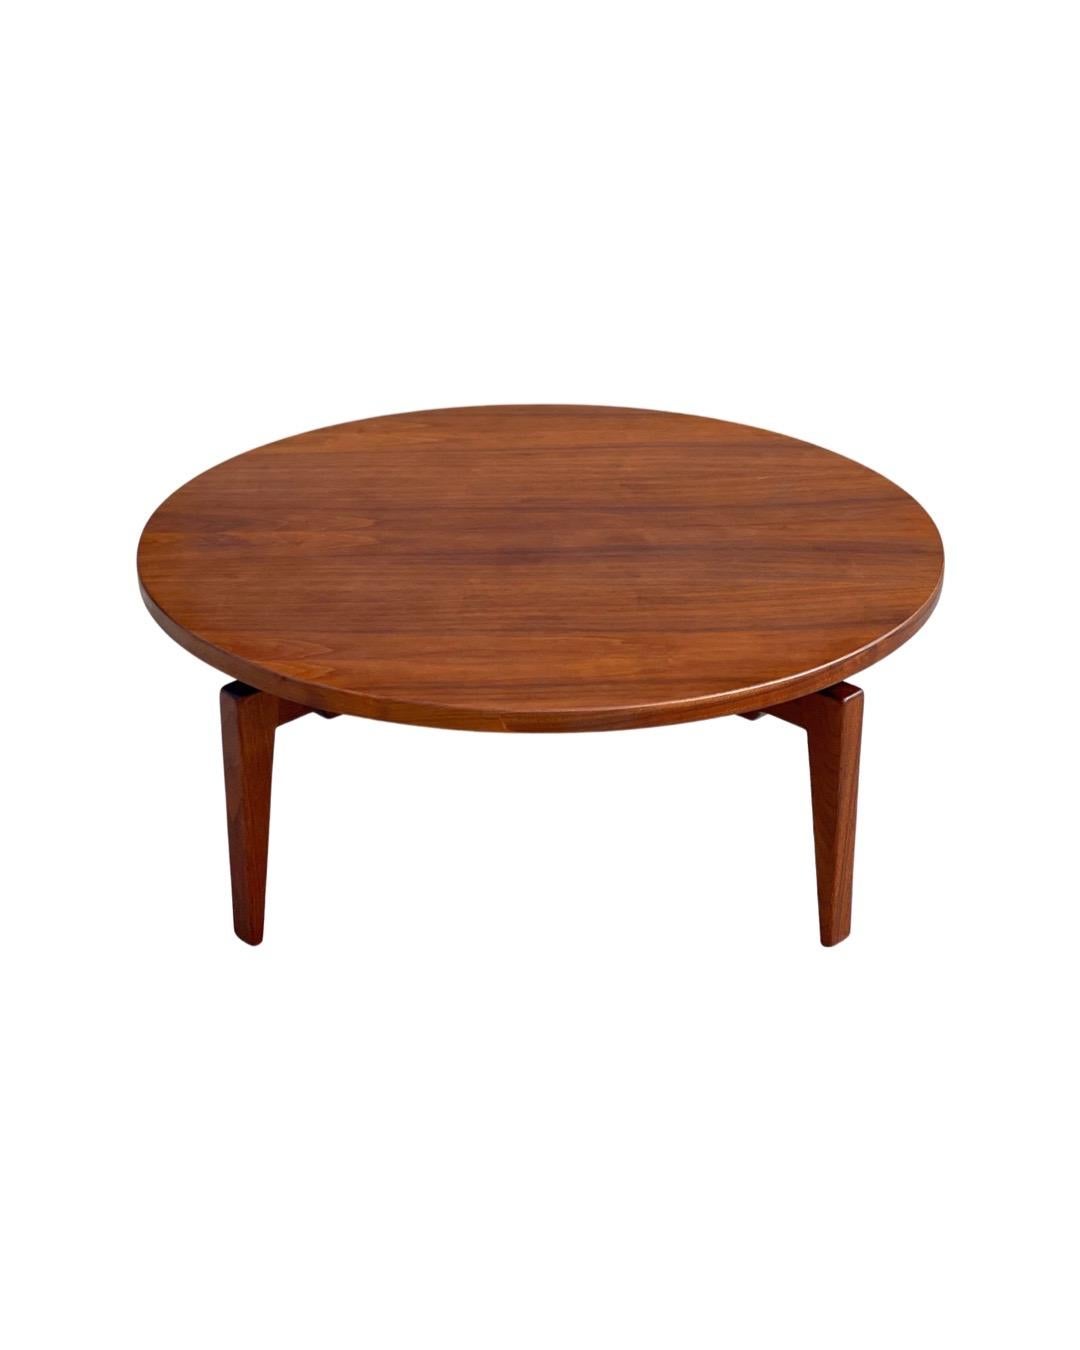 Midcentury Round Coffee Table by Jens Risom in Walnut, Rotating Lazy Susan 3